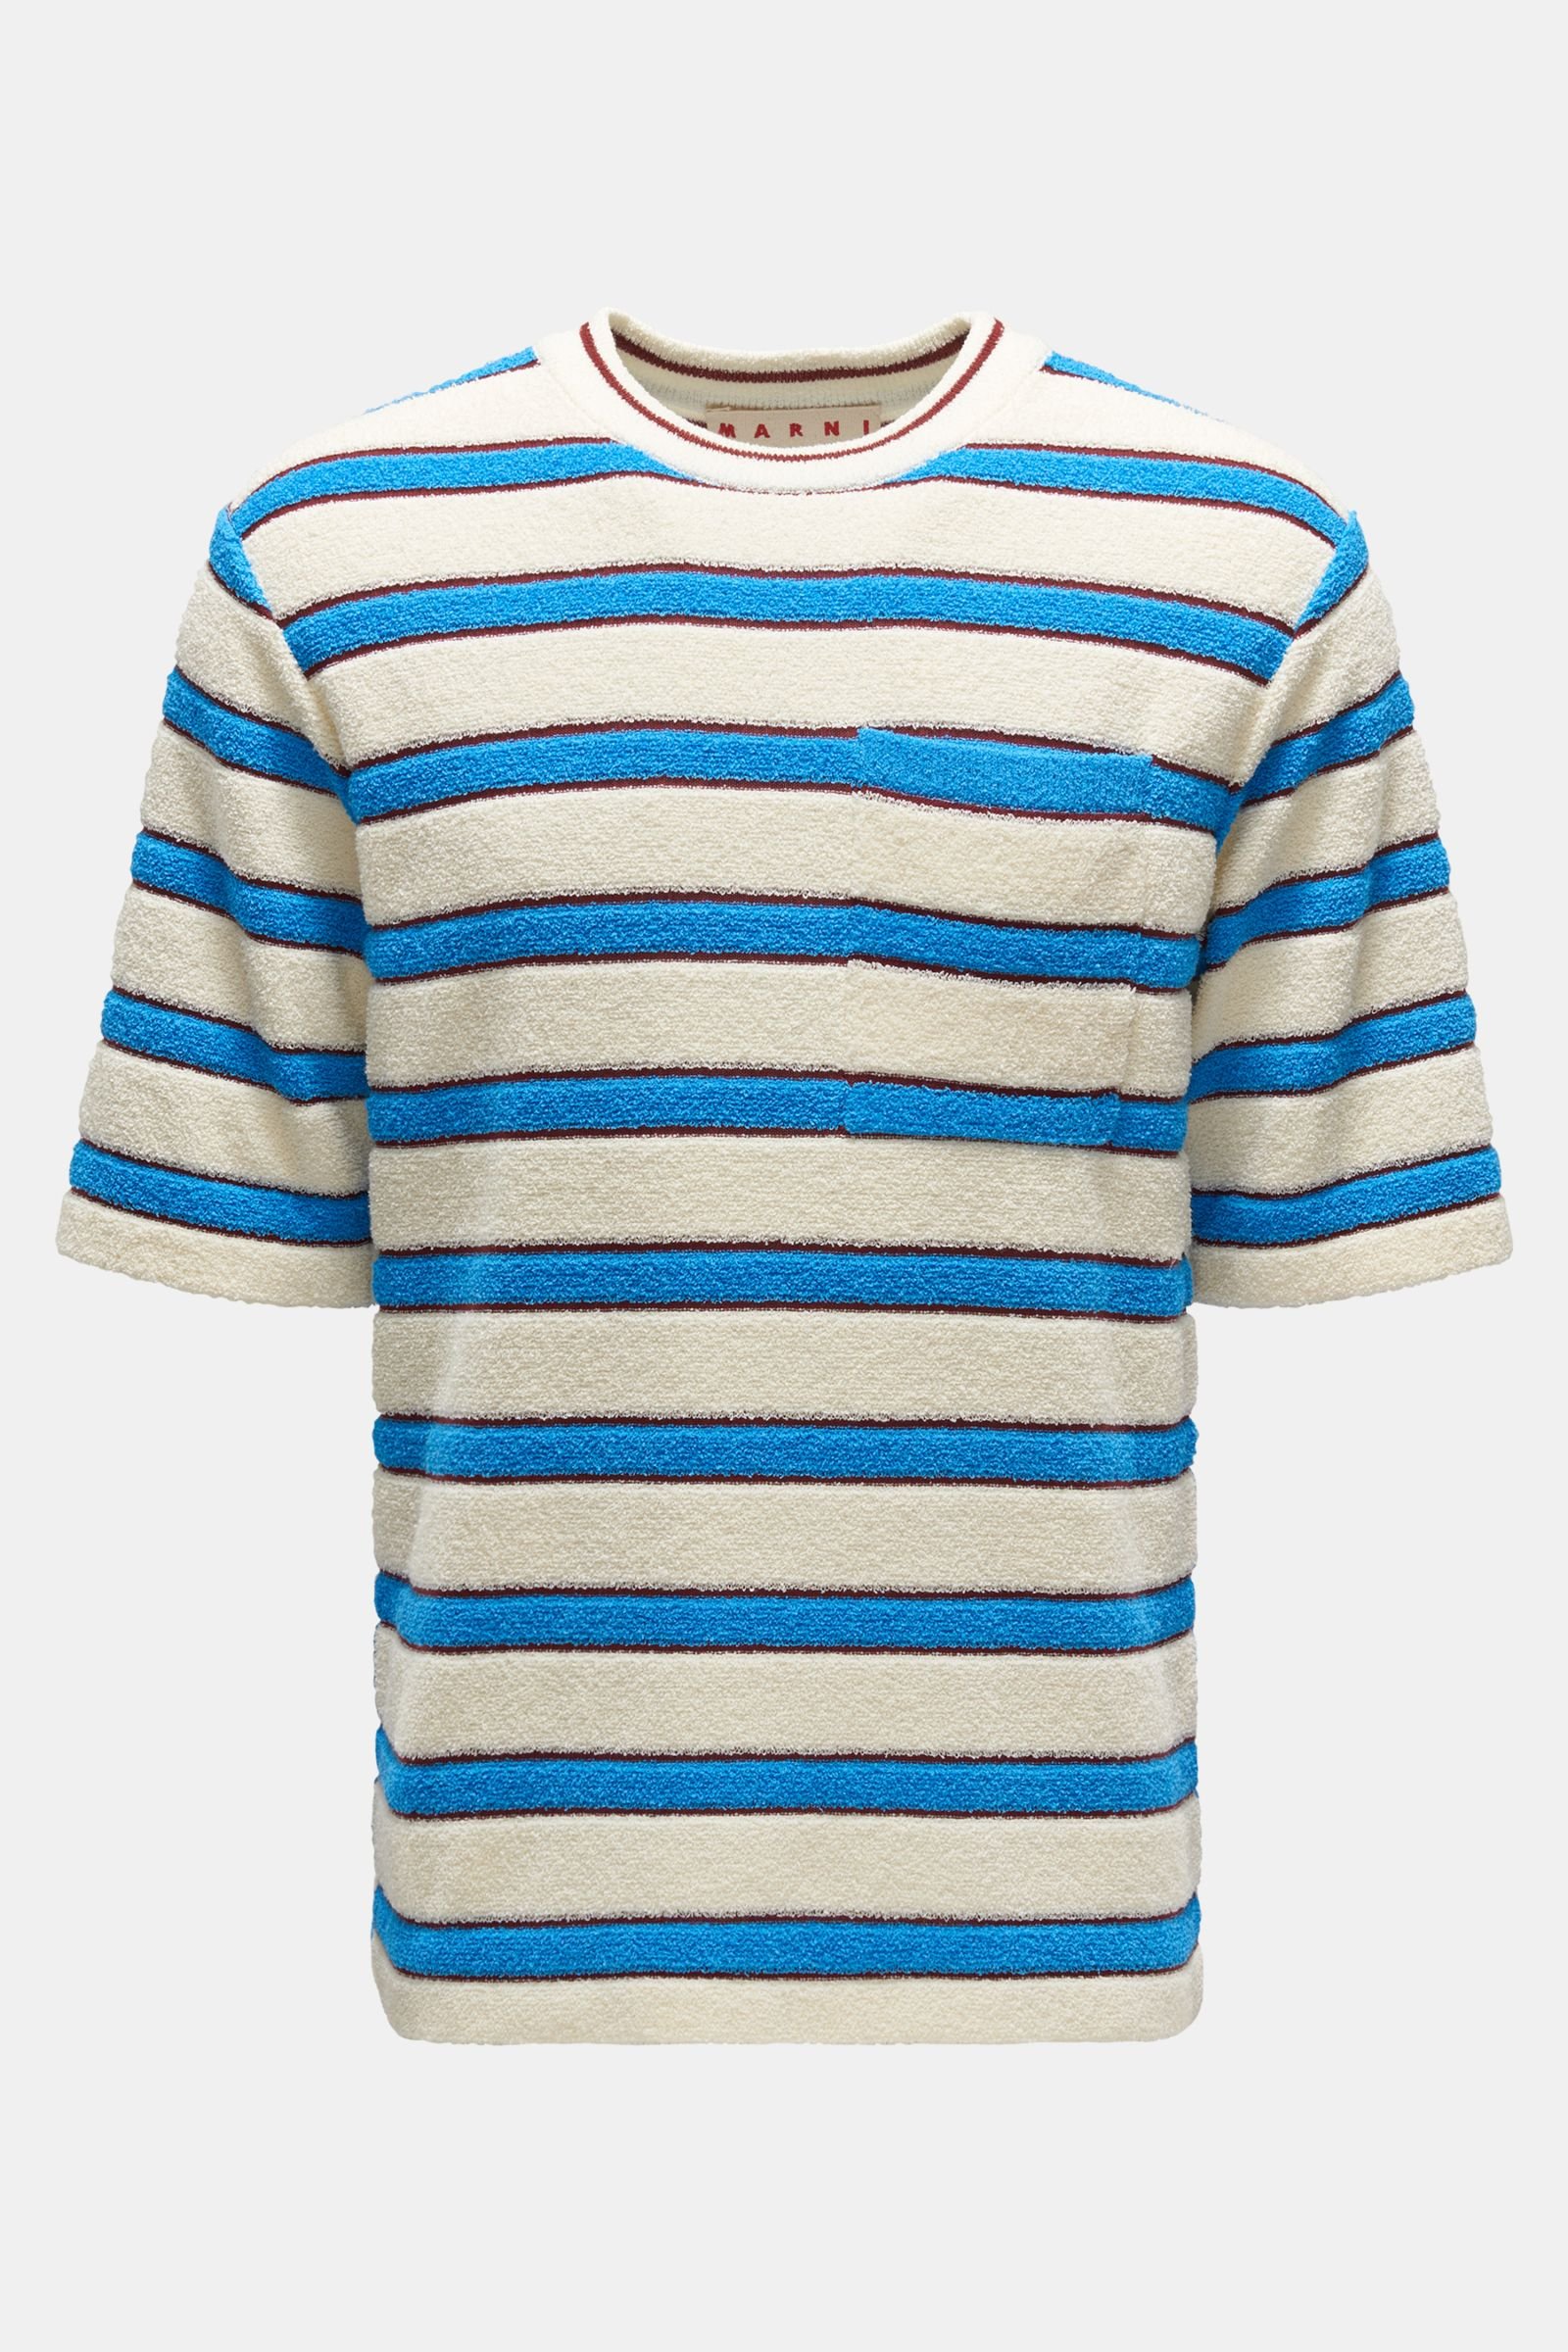 Crew neck terry T-shirt with blue/cream stripes